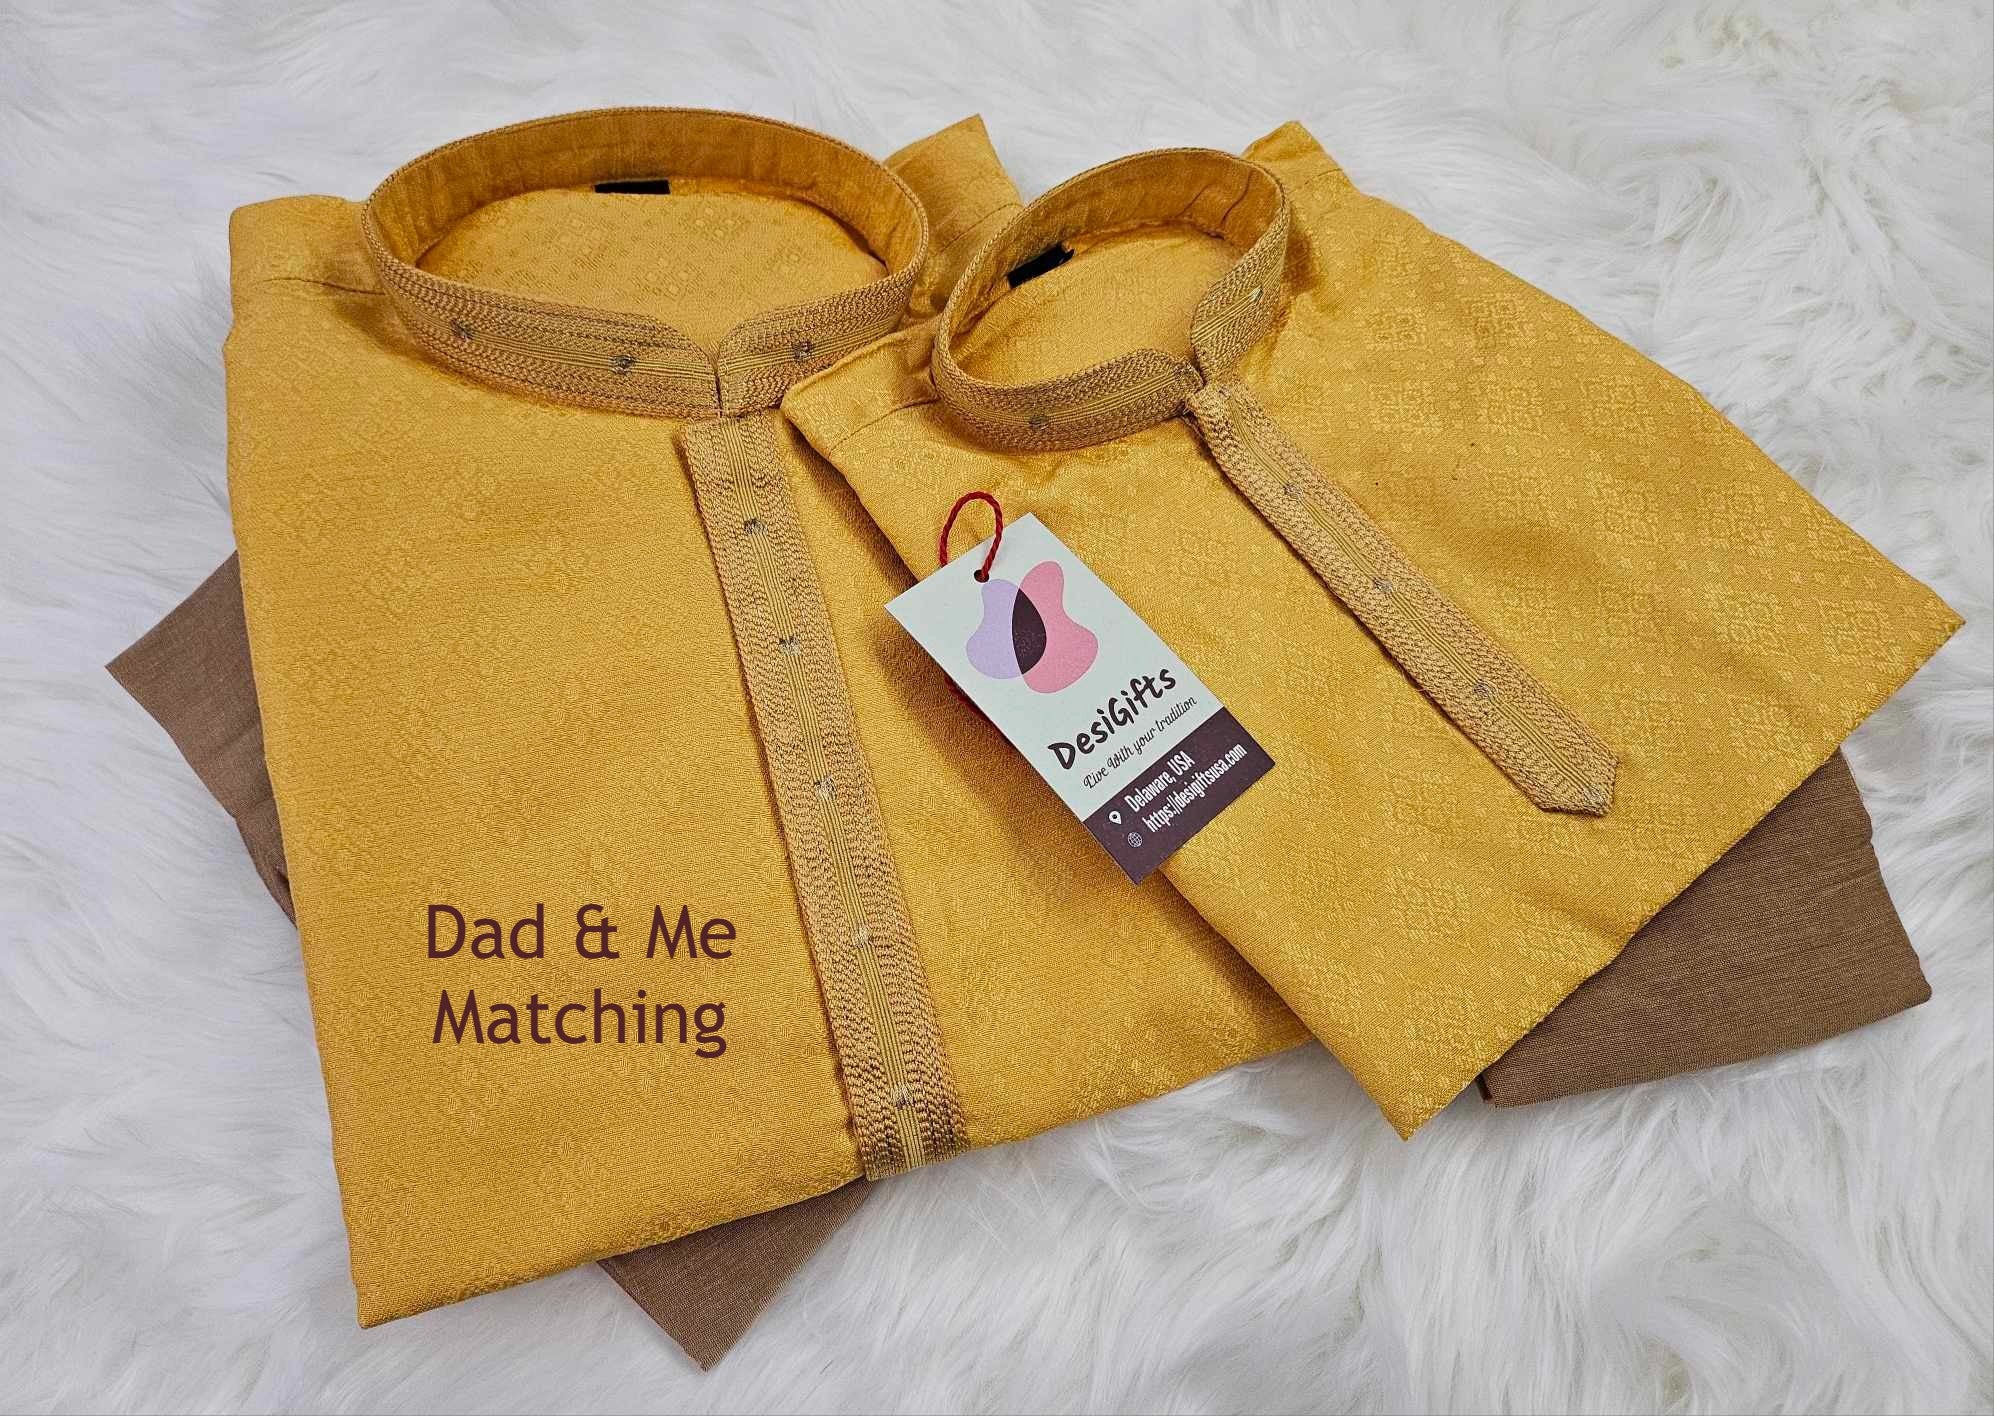 Honey Yellow Shade 2 Piece Lightweight Kurta Pajama Set with Self Woven Work, Father & Son's Outfit, DM -1133